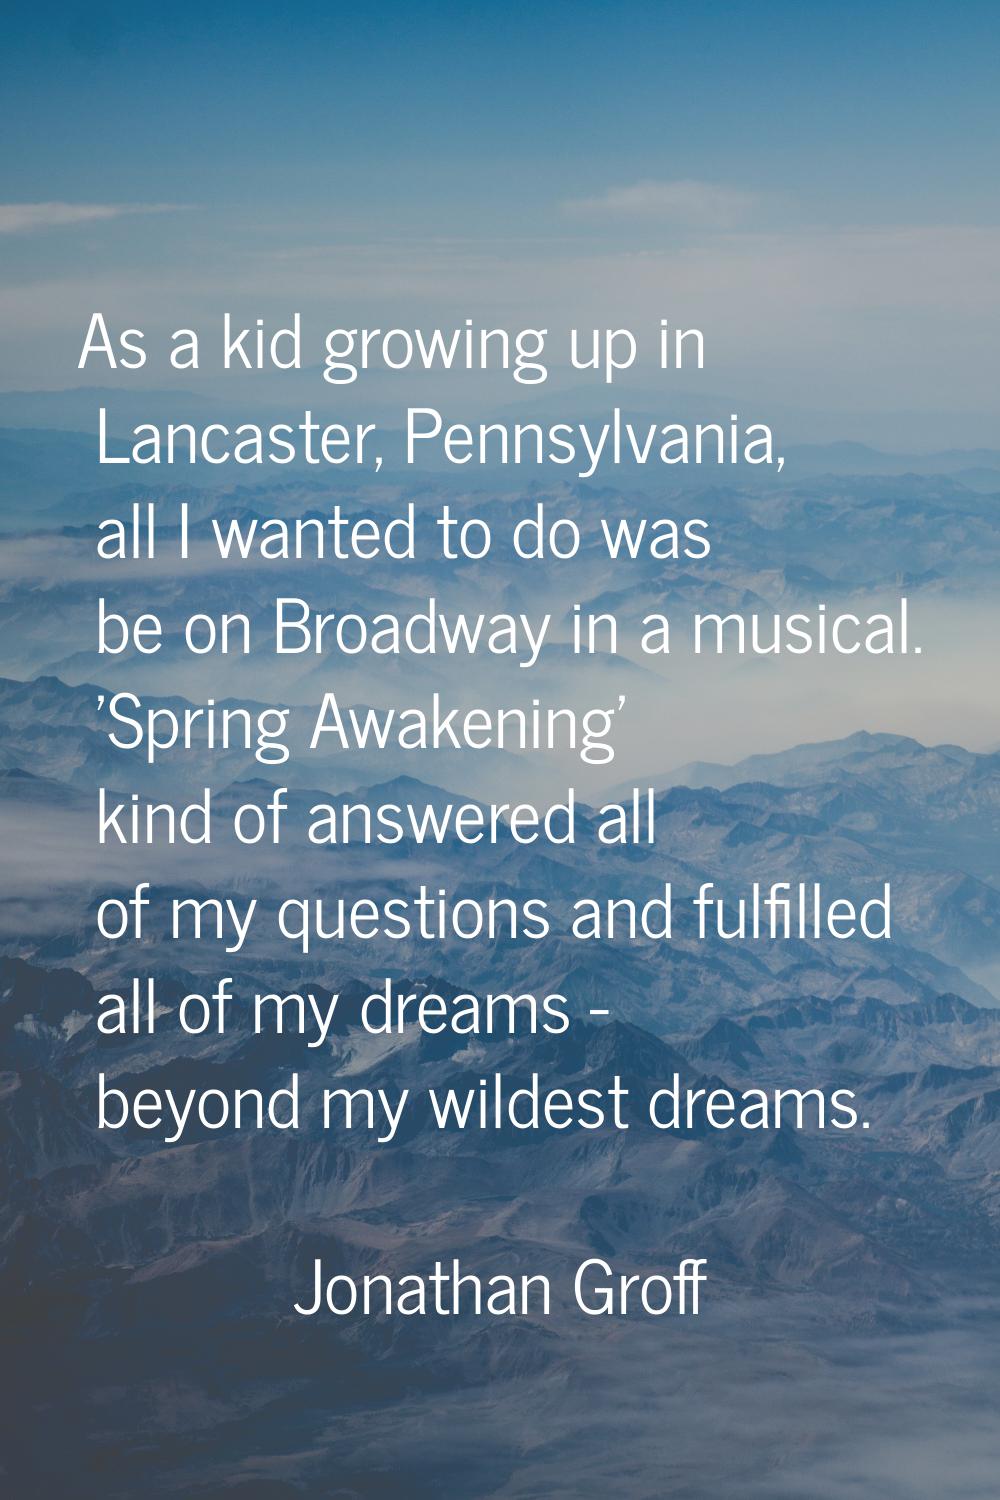 As a kid growing up in Lancaster, Pennsylvania, all I wanted to do was be on Broadway in a musical.